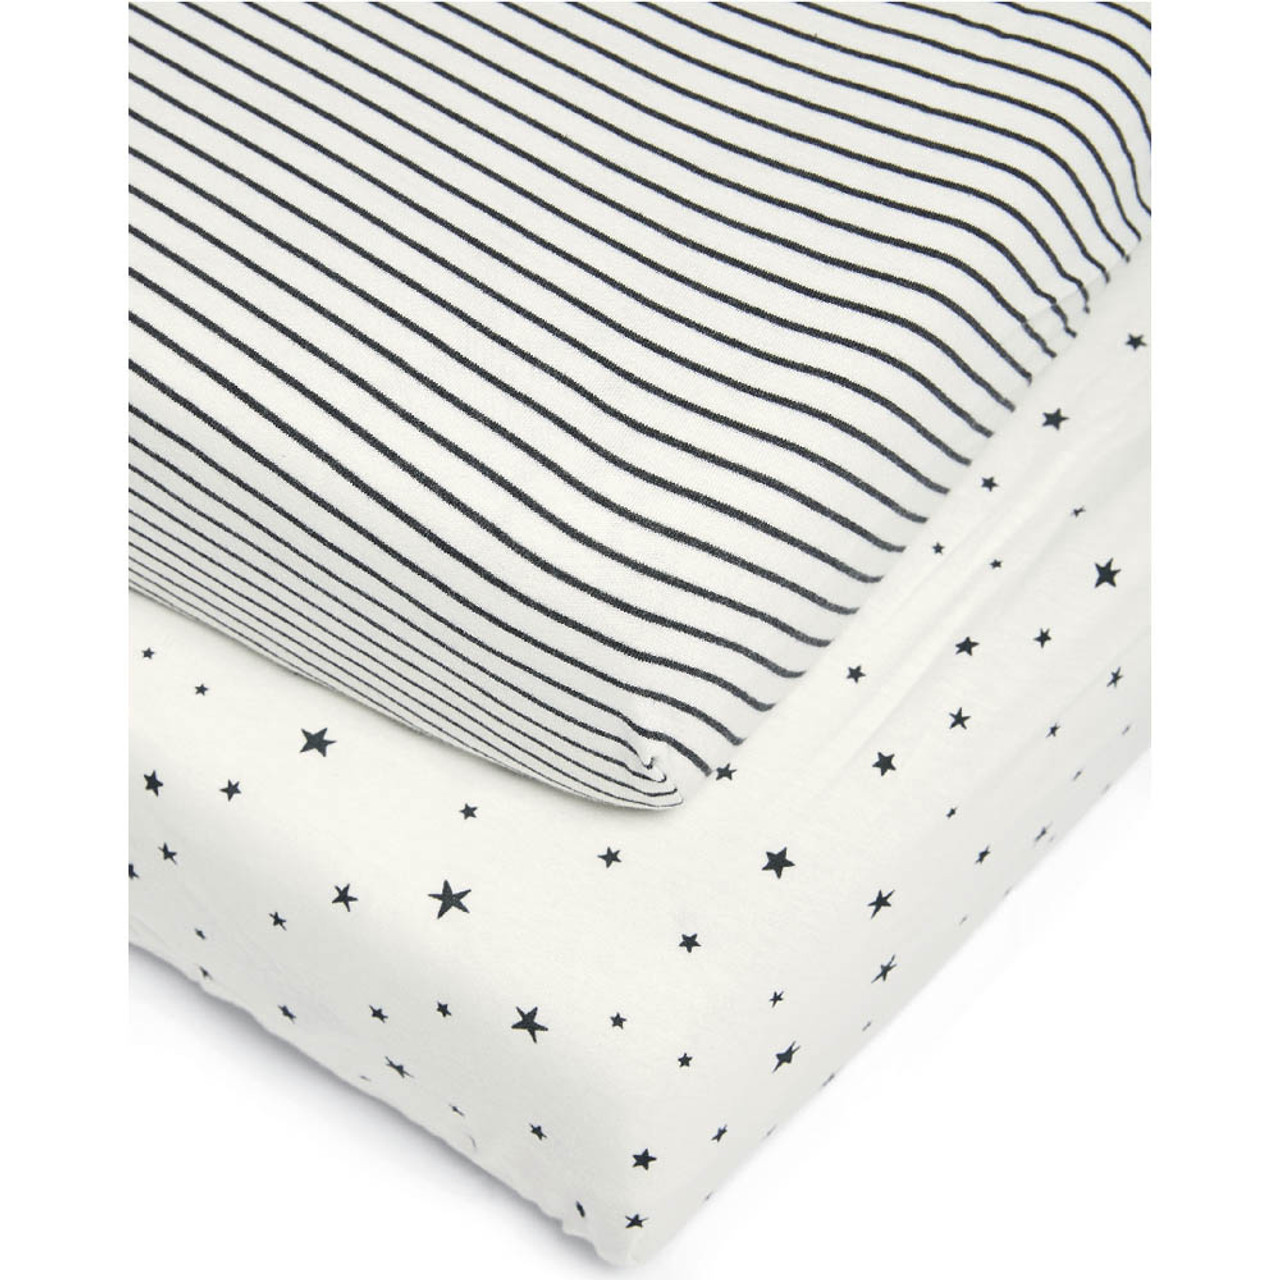 mamas-papas-cotbed-fitted-sheets-2-pack-starry-skies-1__79294